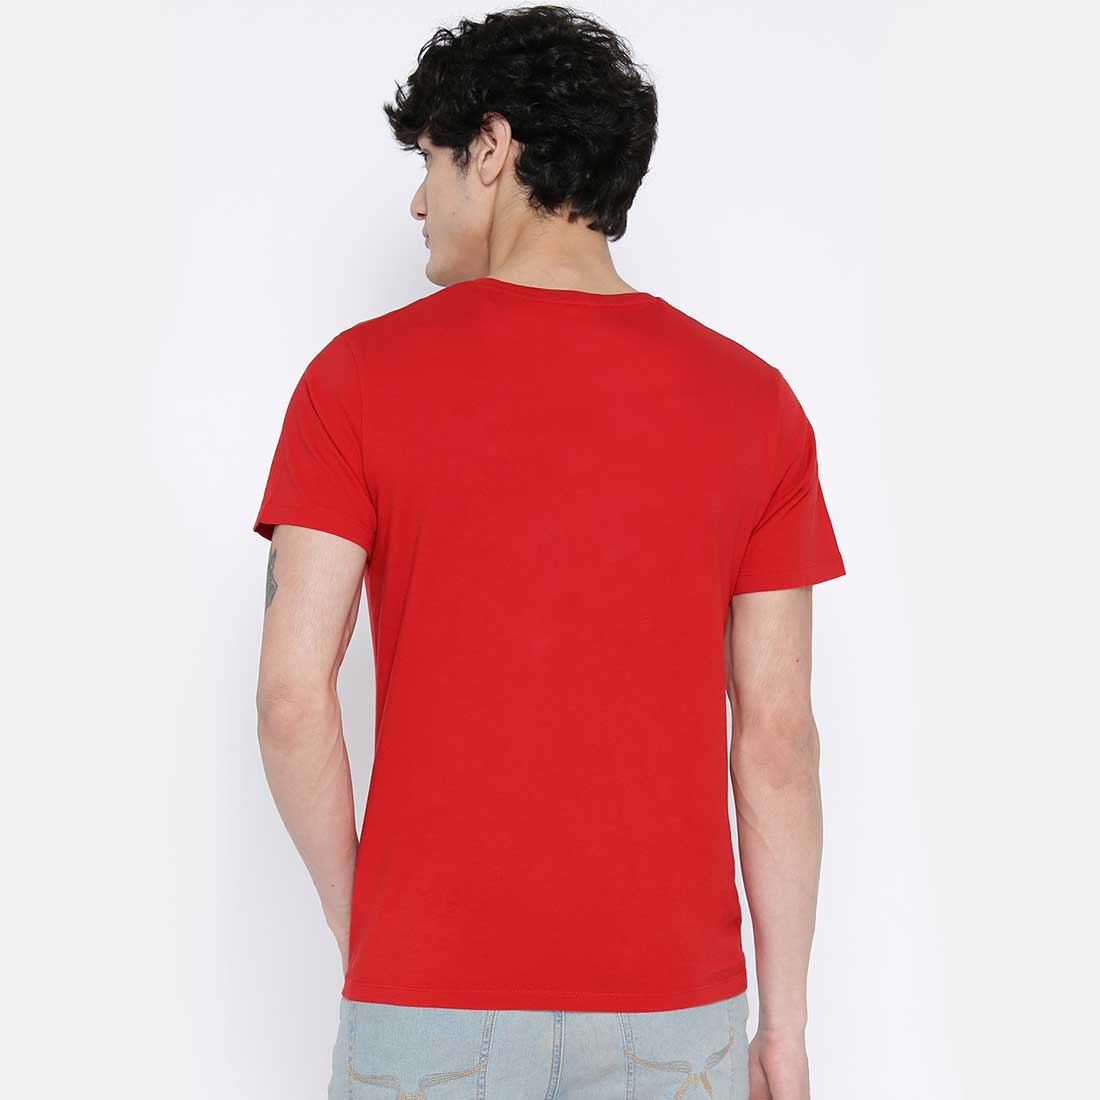 If You like It Red Men T-Shirt